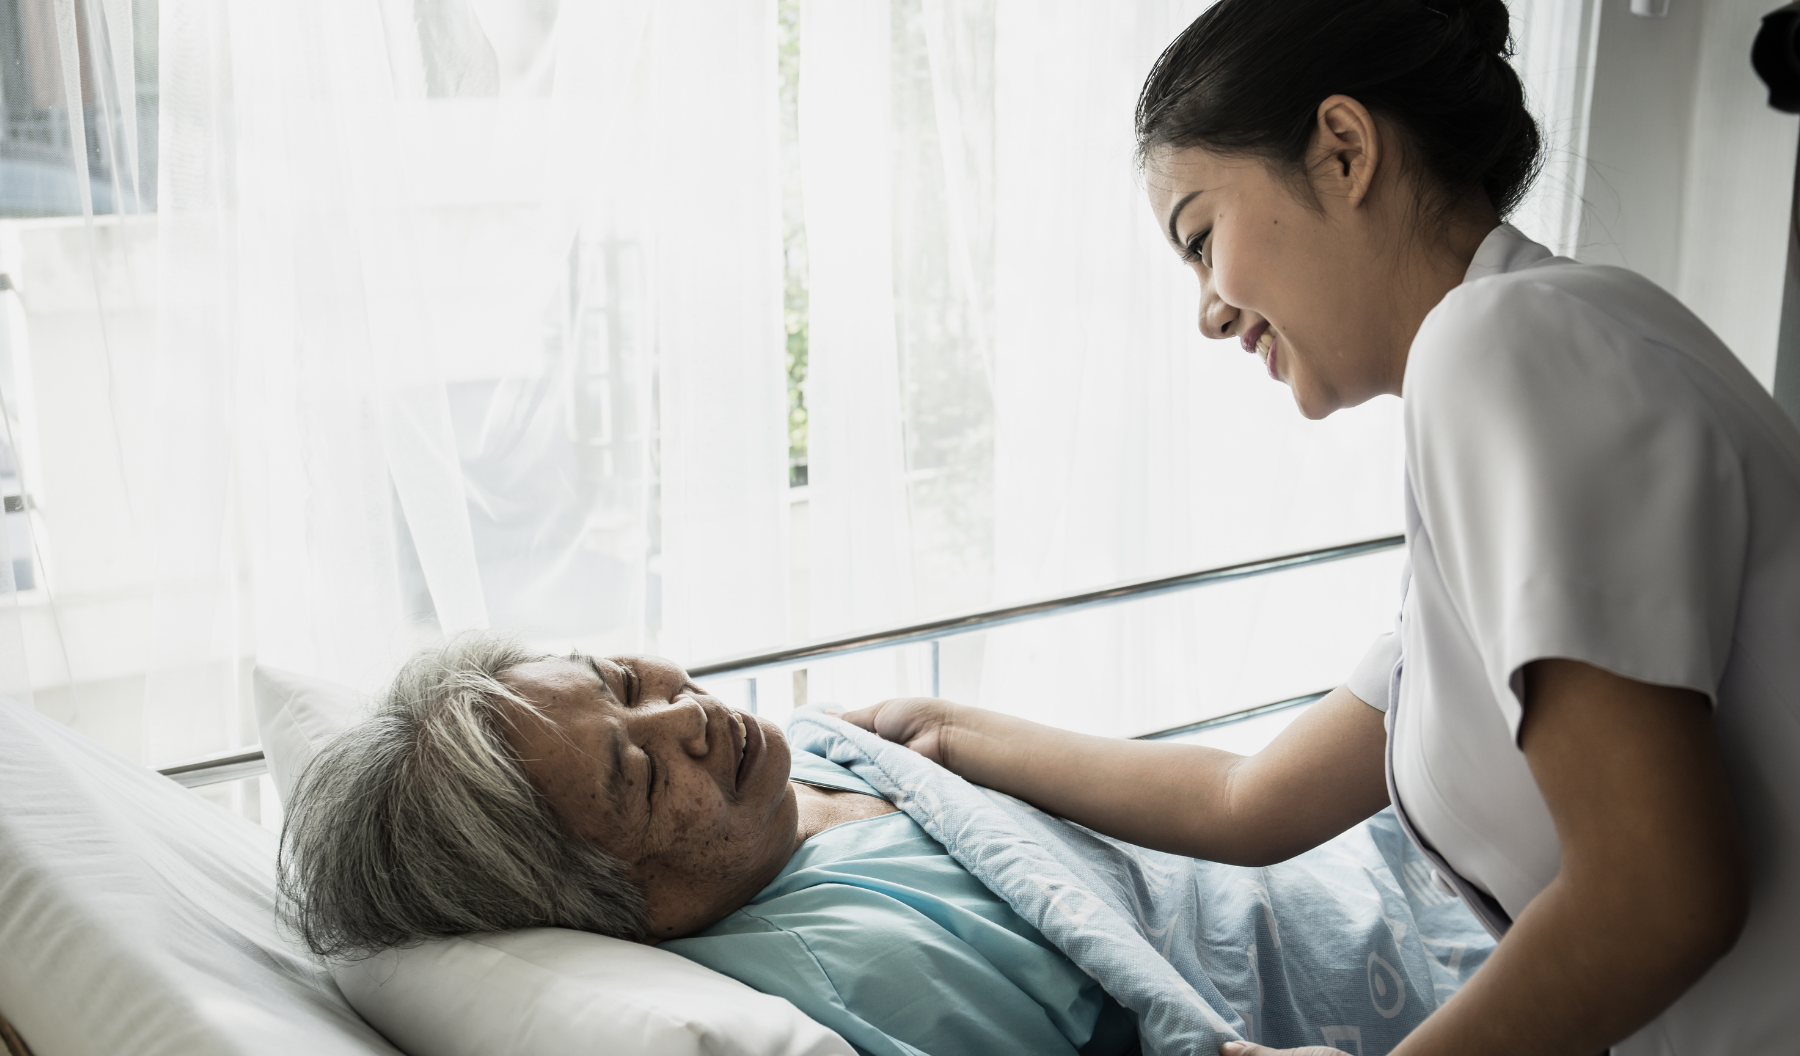 The Crucial Role of Compassion in Healthcare Settings